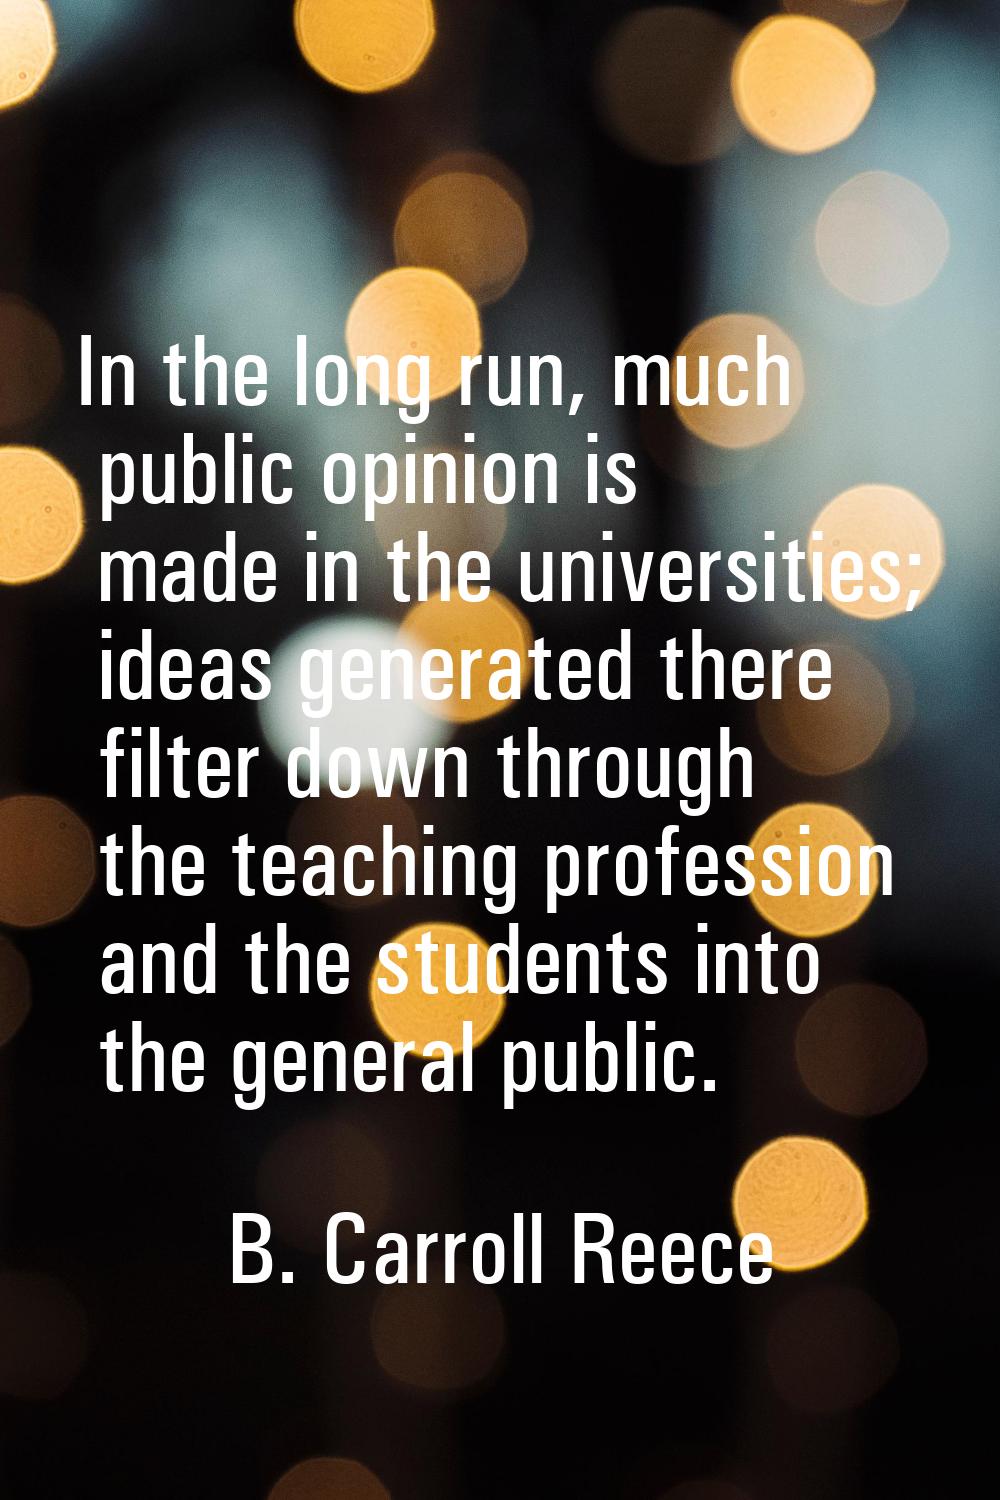 In the long run, much public opinion is made in the universities; ideas generated there filter down